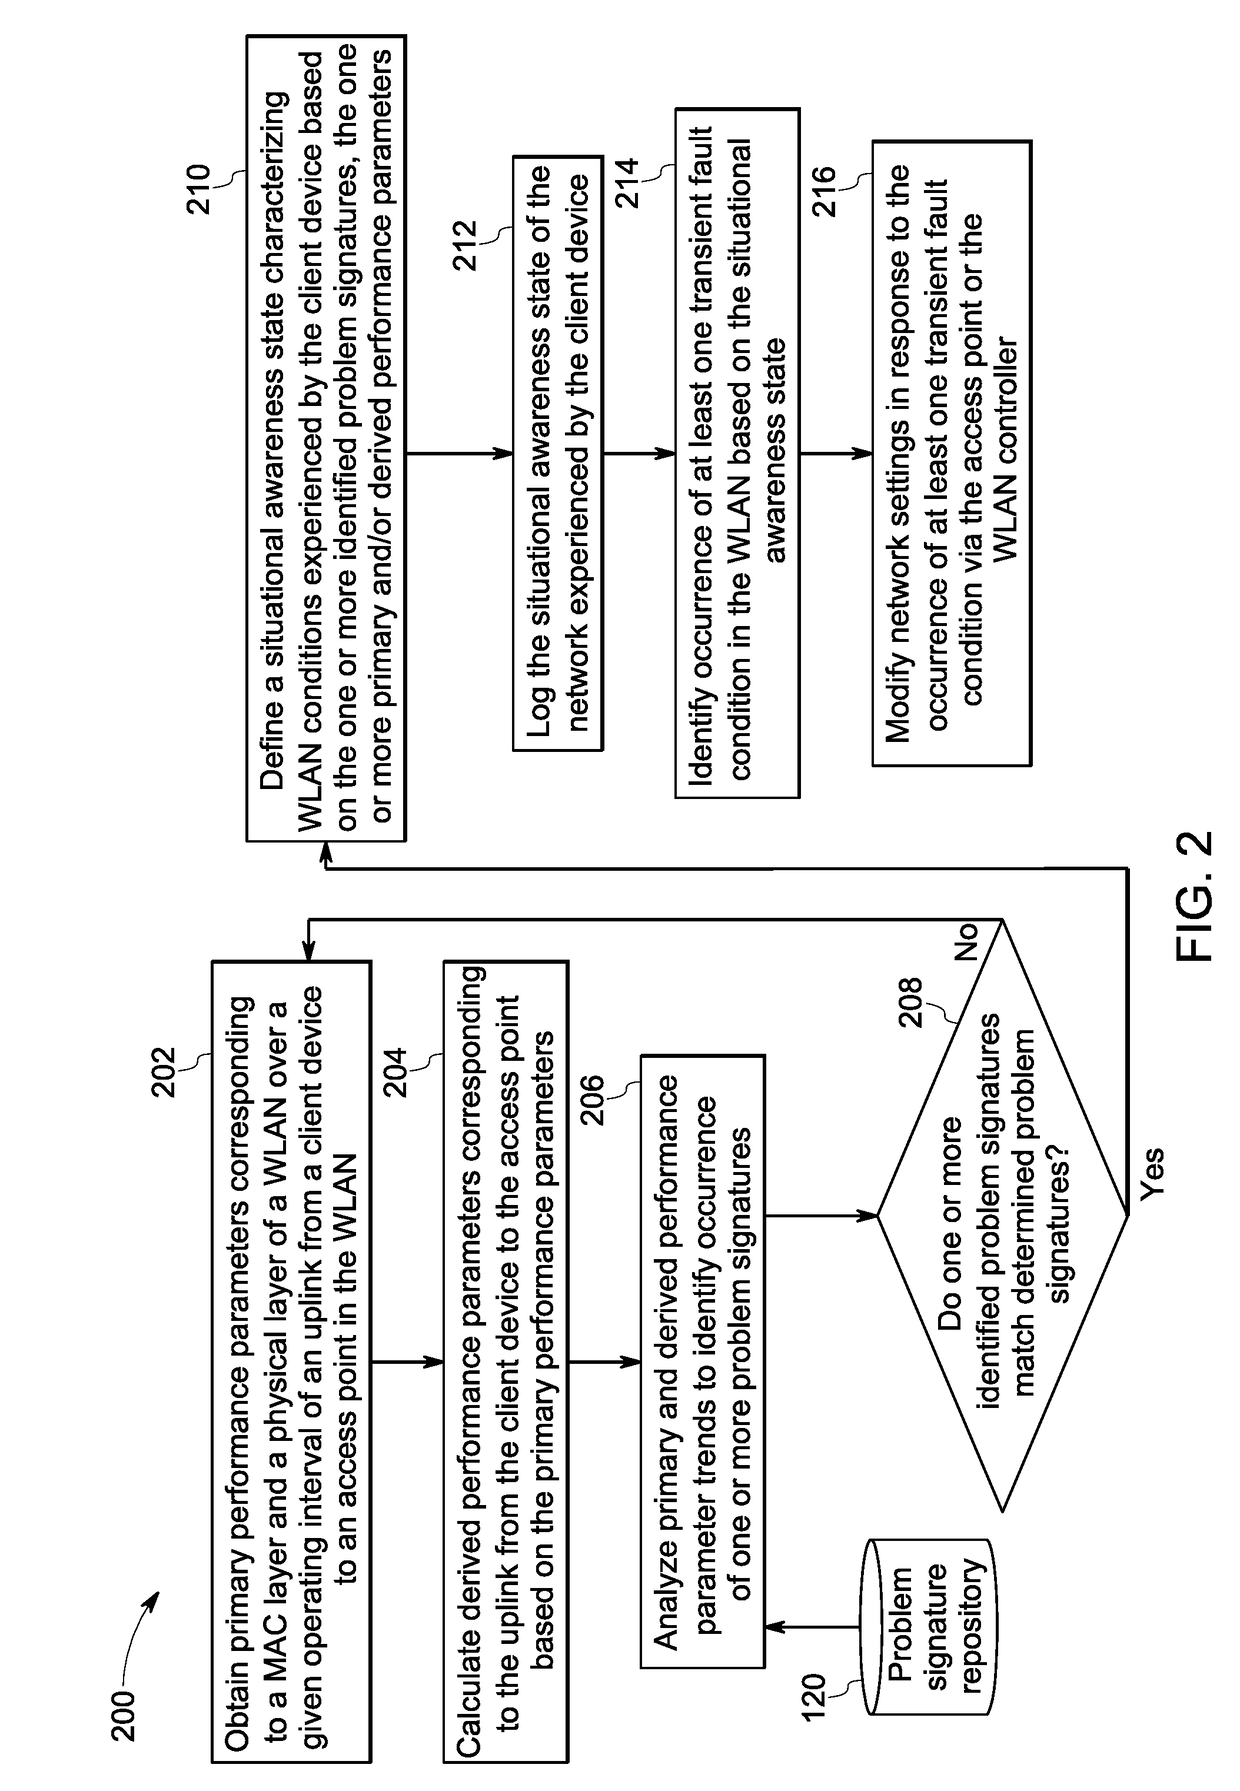 Systems and methods for characterization of transient network conditions in wireless local area networks